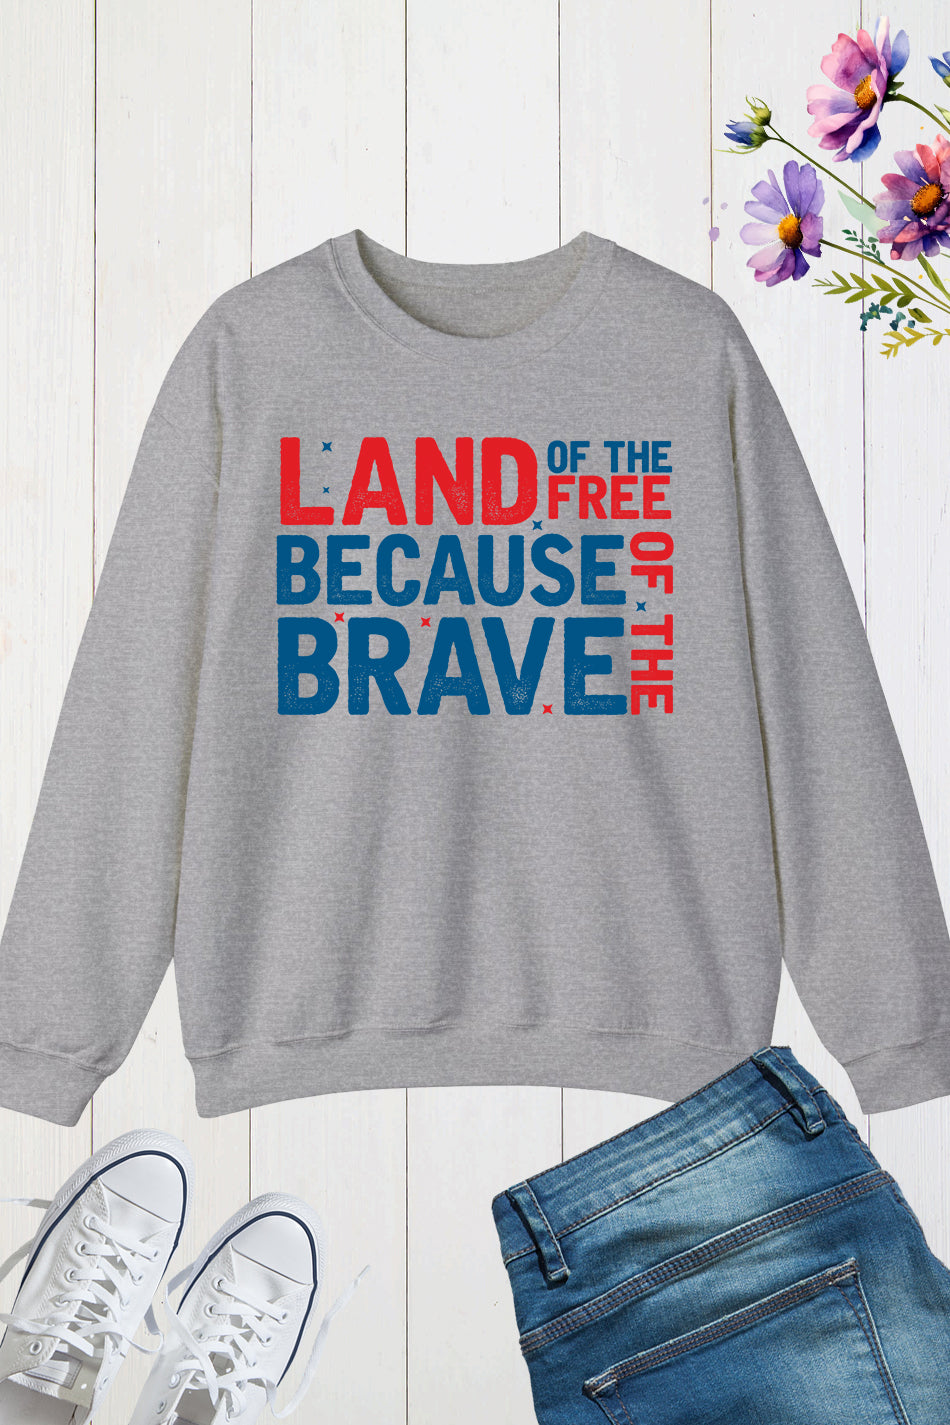 Land Of The Free Because of The Brave Sweatshirts